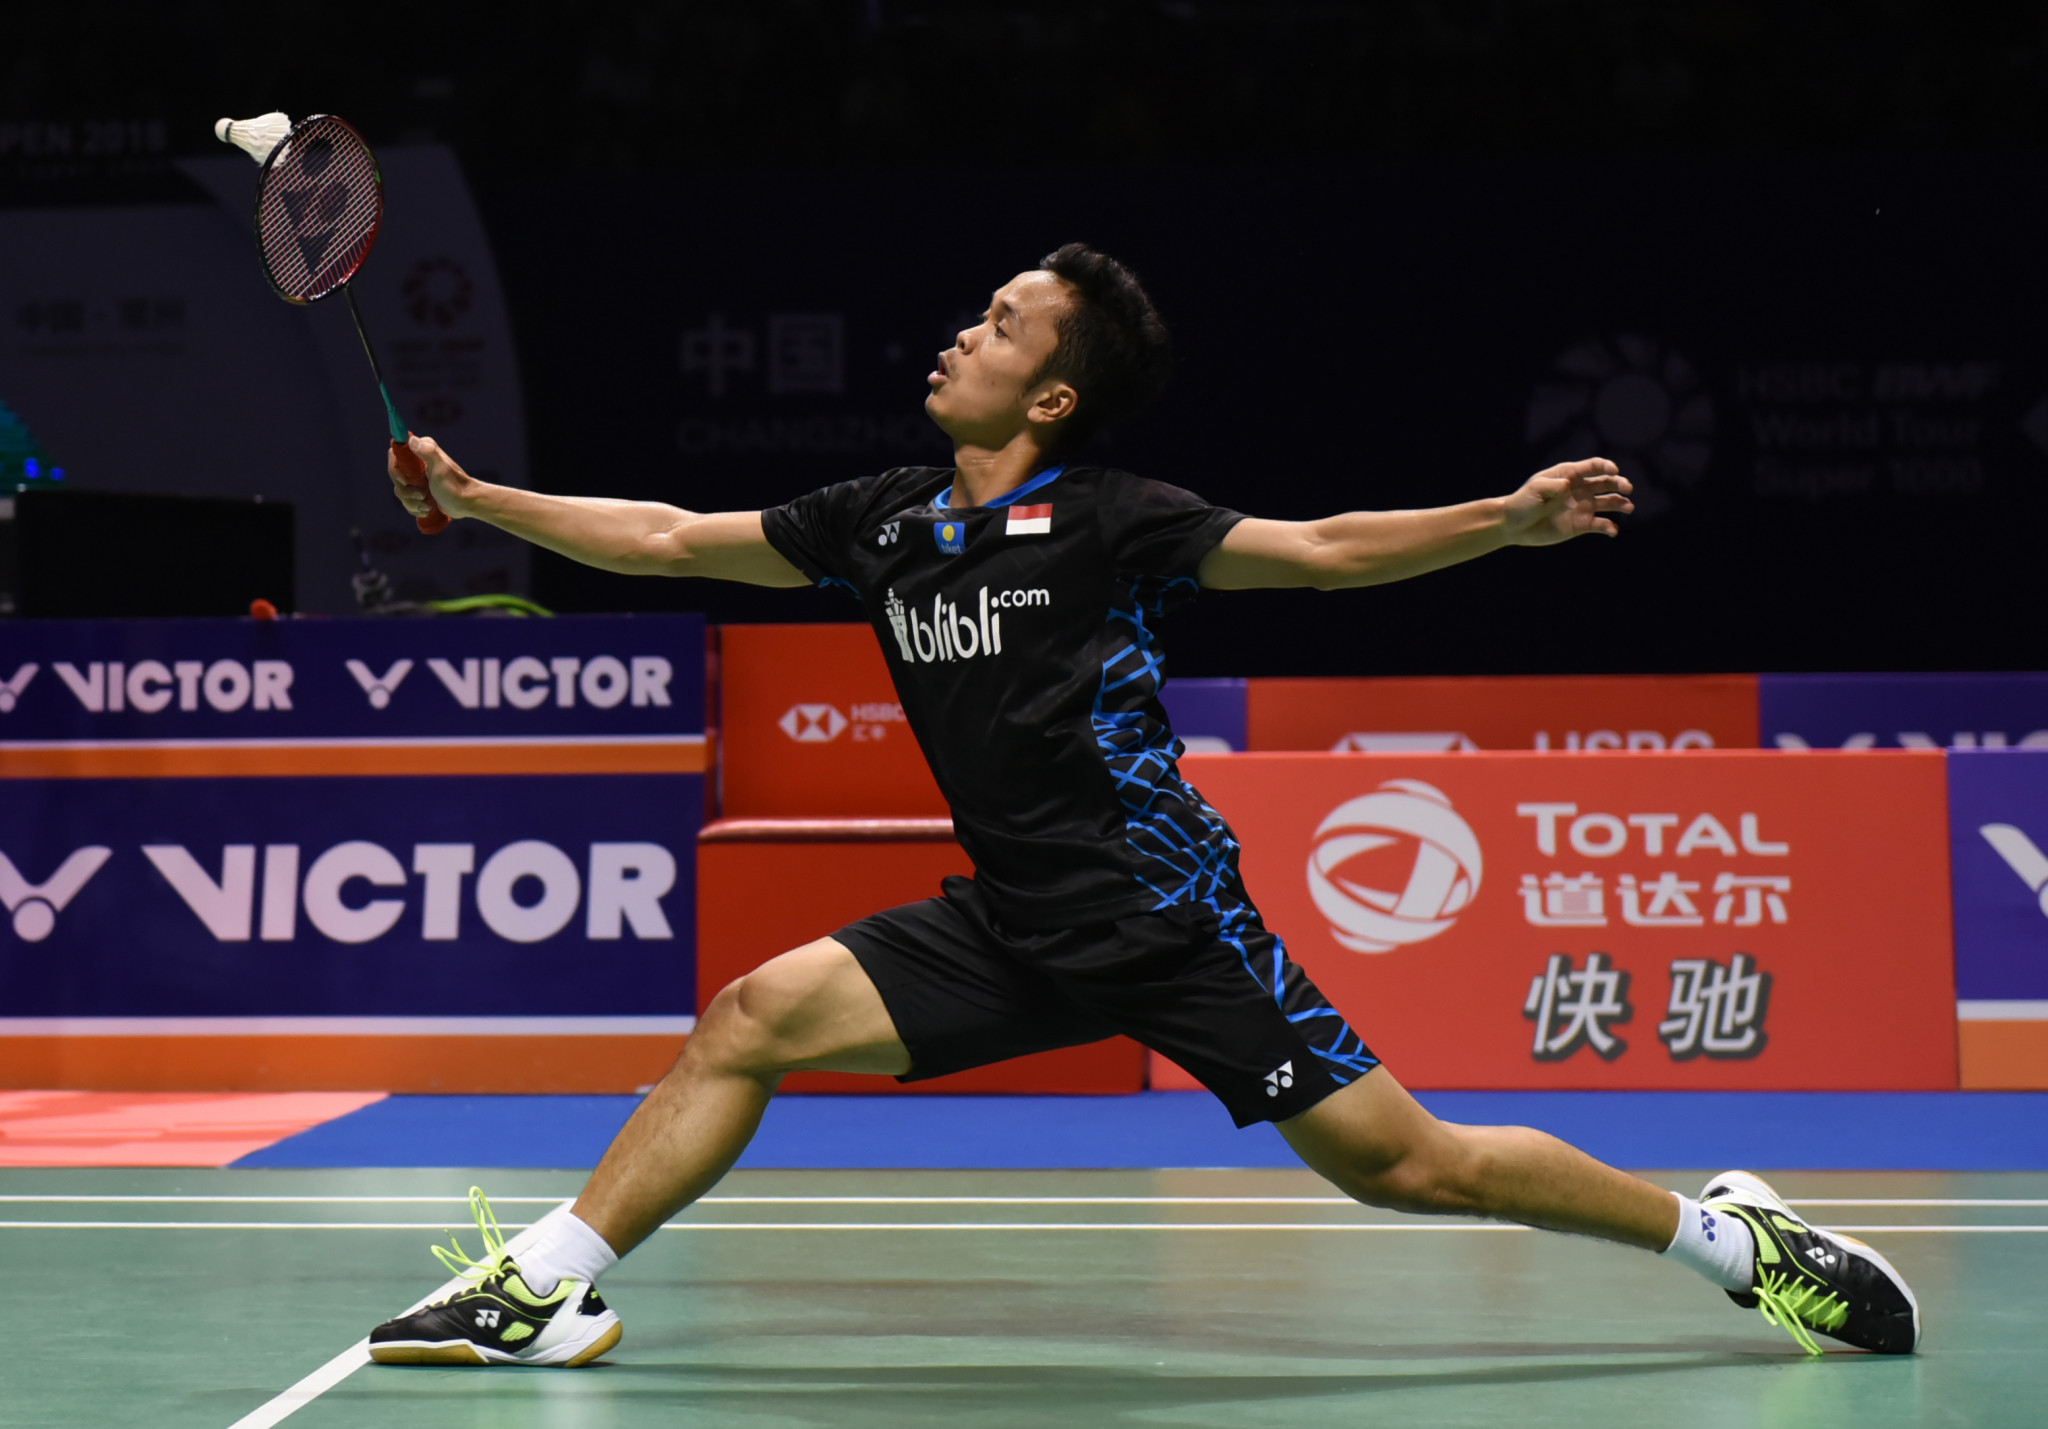  Ginting falls to shock early defeat in BWF French Open men's singles